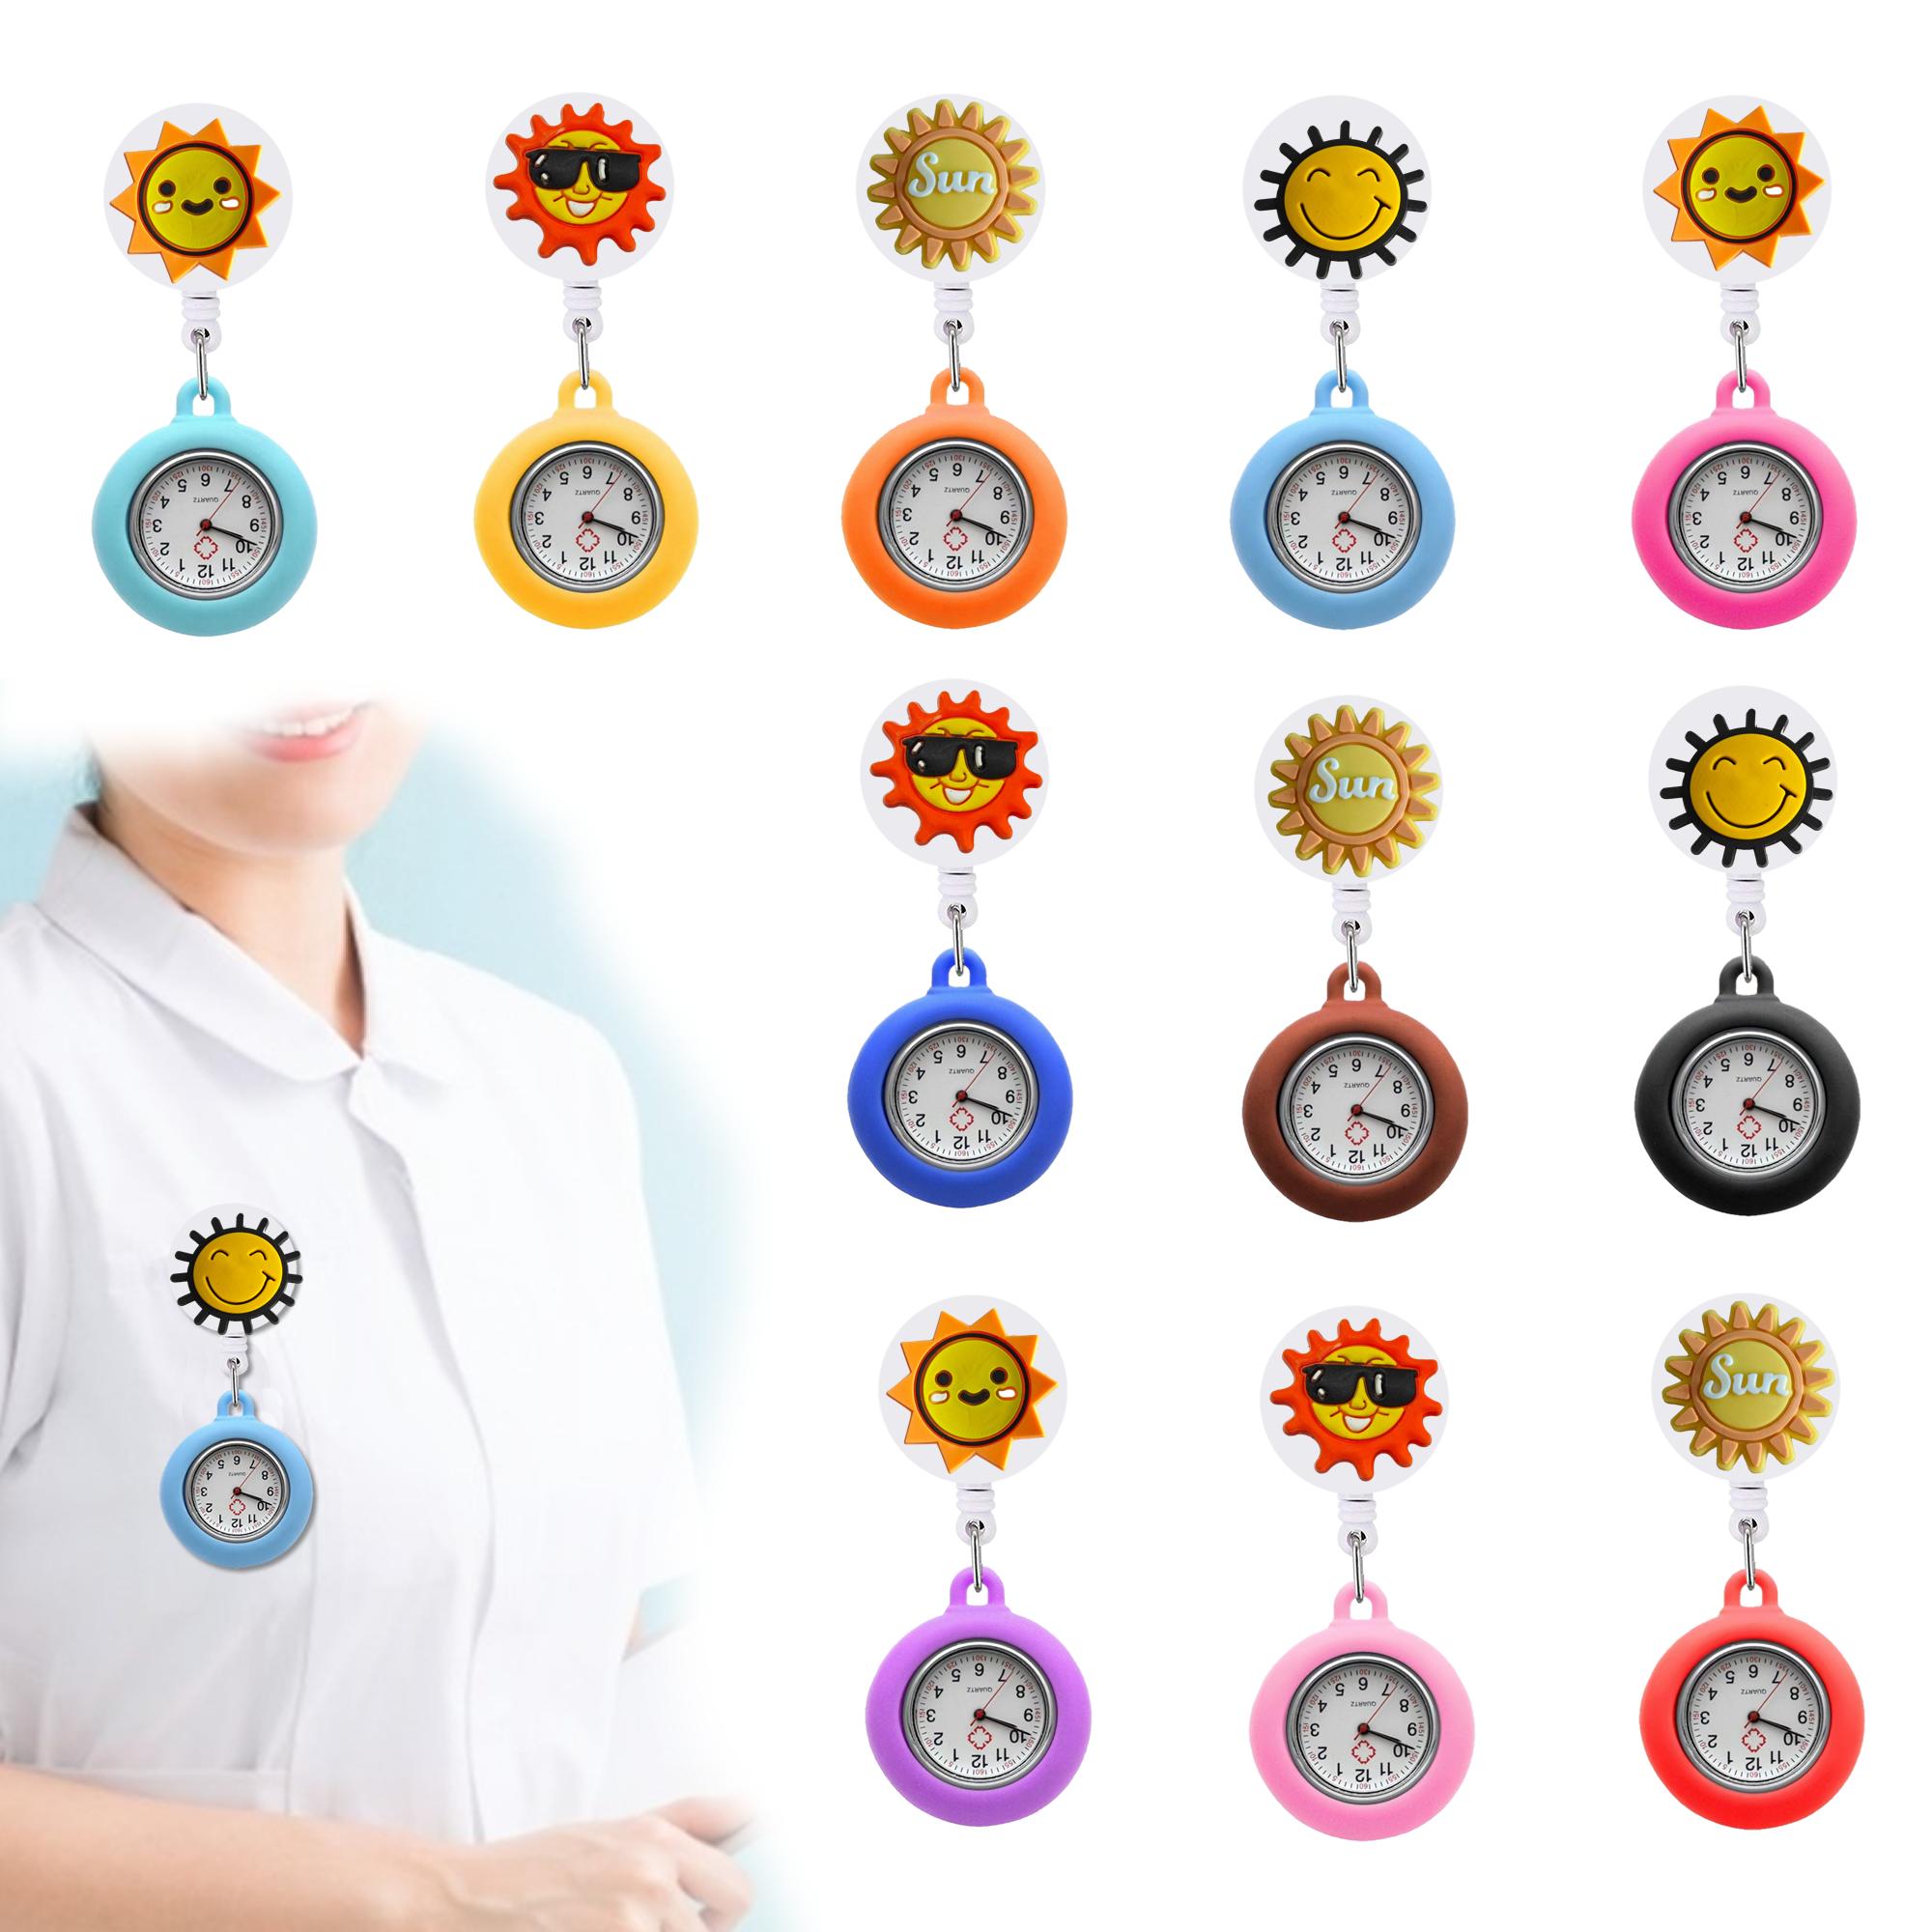 Other Fashion Accessories Sun Clip Pocket Watches On Nursing Watch Clip-On Hanging Lapel Nurse Pattern Design Brooch Pin-On Drop Deliv Otn3X